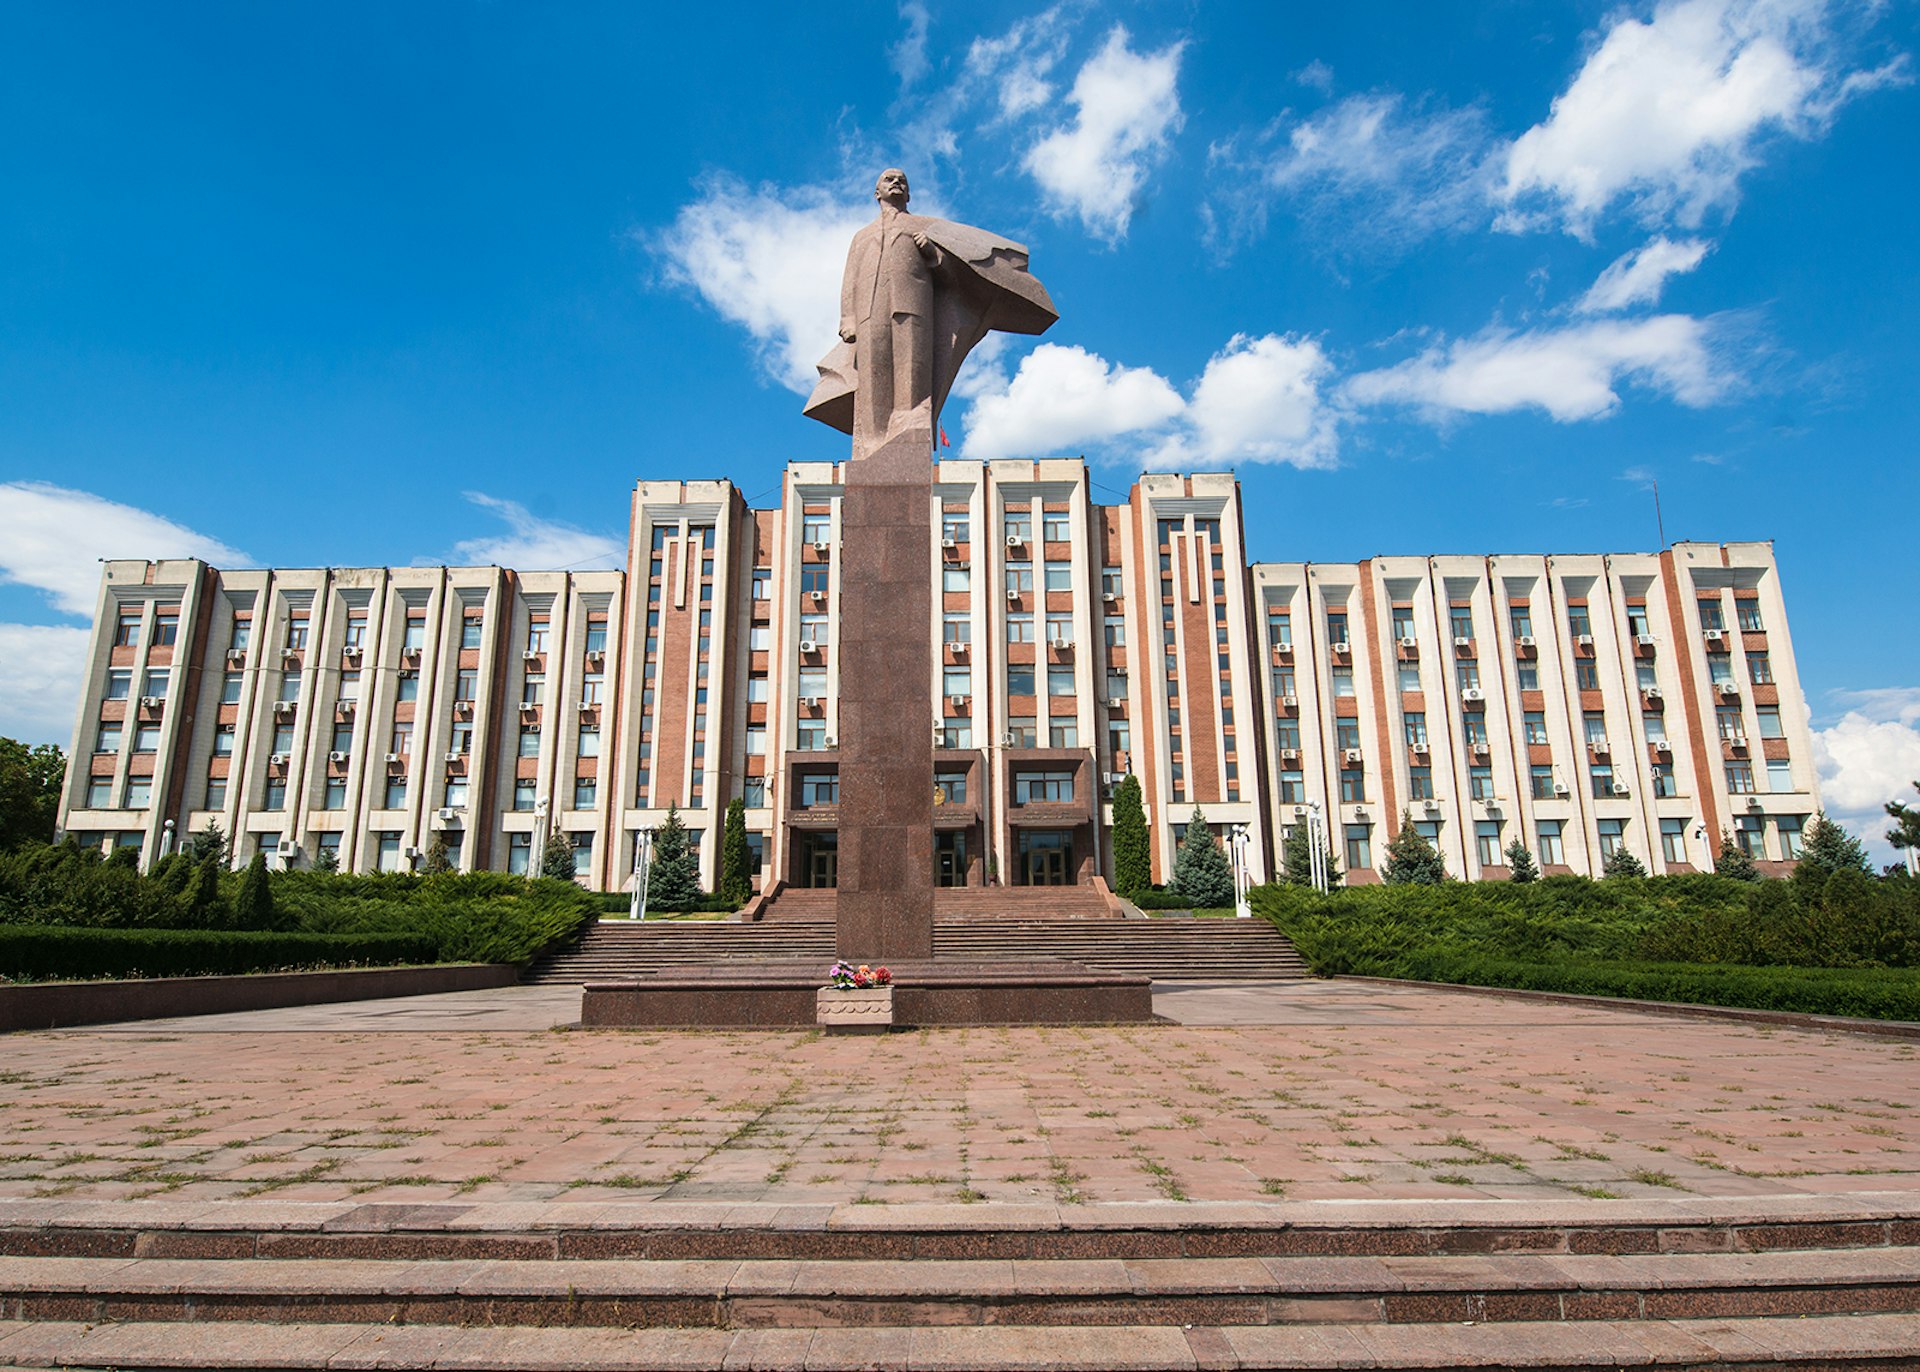 The statue of Lenin in front of the parliament building in Tiraspol, the capital of Transnistria, a self-governing territory not recognised by the United Nations © Pe3k / Shutterstock